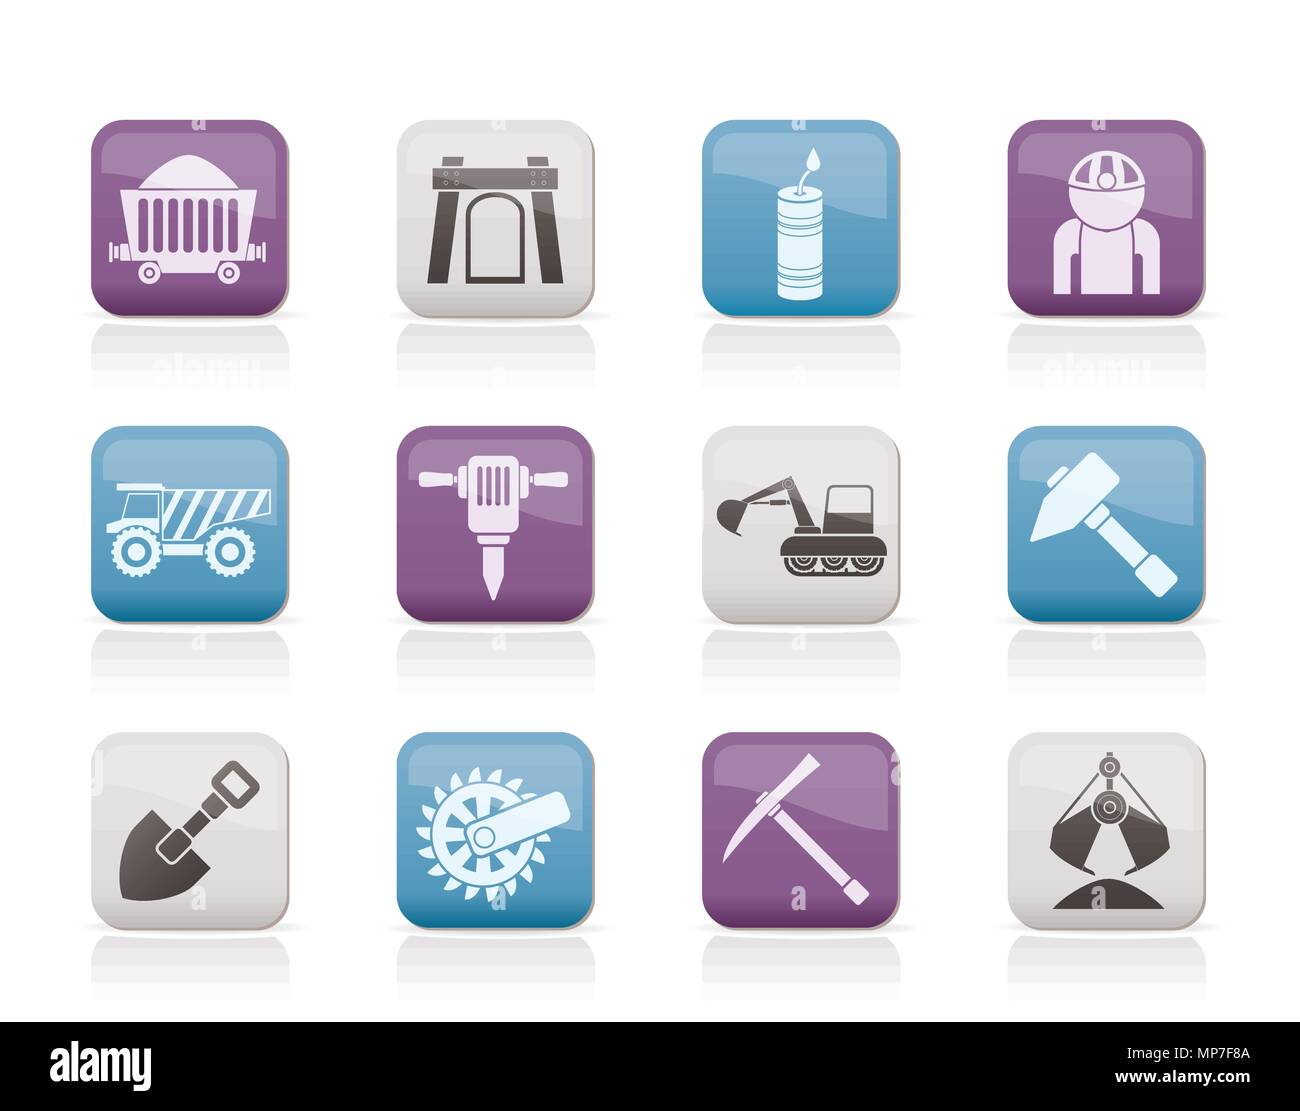 Mining and quarrying industry objects and icons - vector icon set Stock Vector